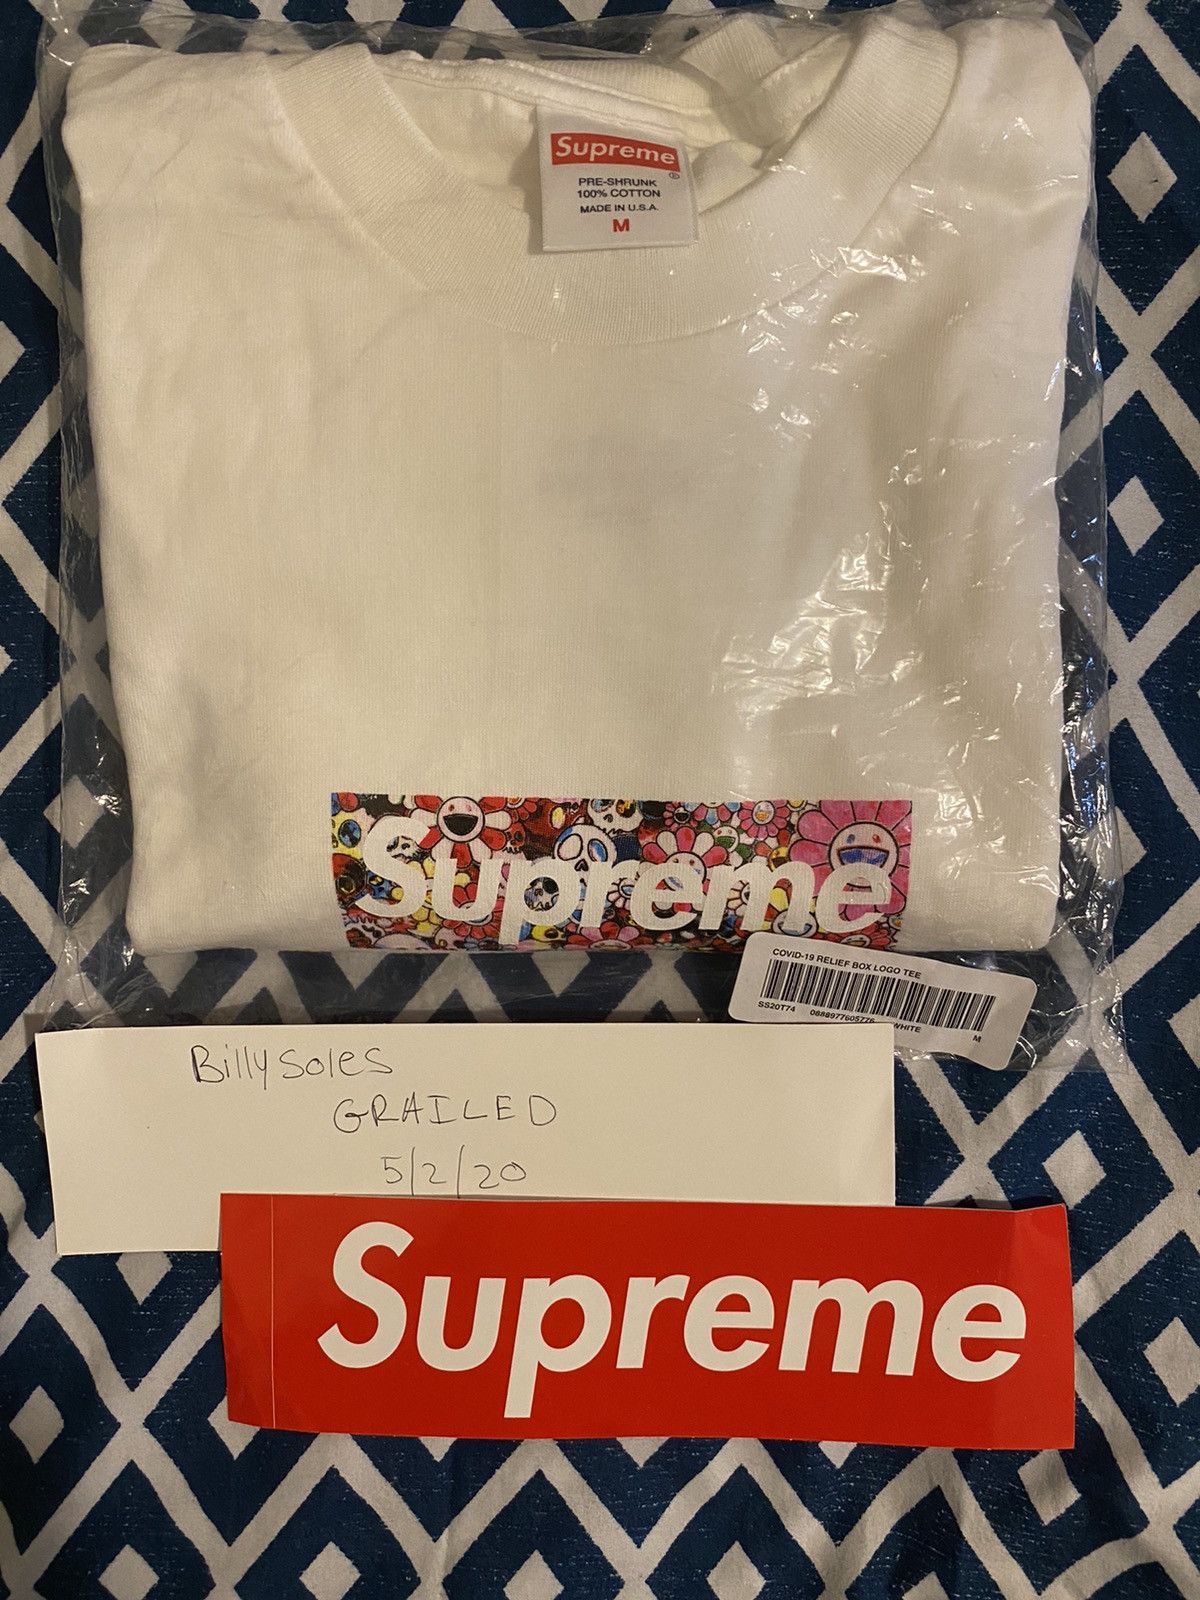 Supreme x Takashi Murakami COVID-19 Tees Now Listed on Resale Sites as High  as $1,500 – MADE Trends News